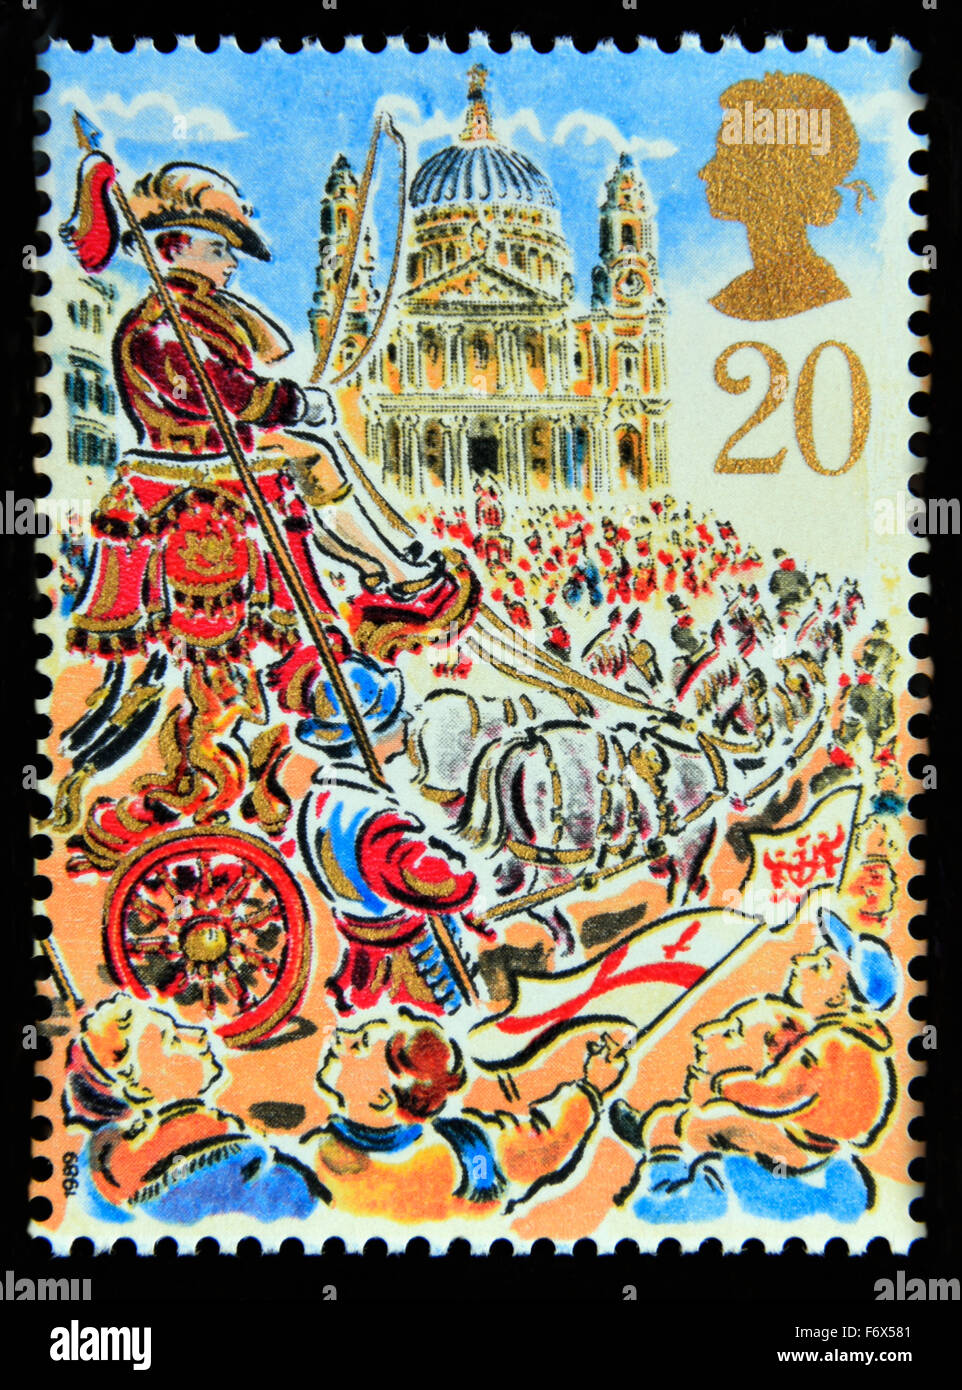 Postage stamp. Great Britain. Queen Elizabeth II. 1989. Lord Mayor's Show, London. Passing St.Paul's. 20p. Stock Photo